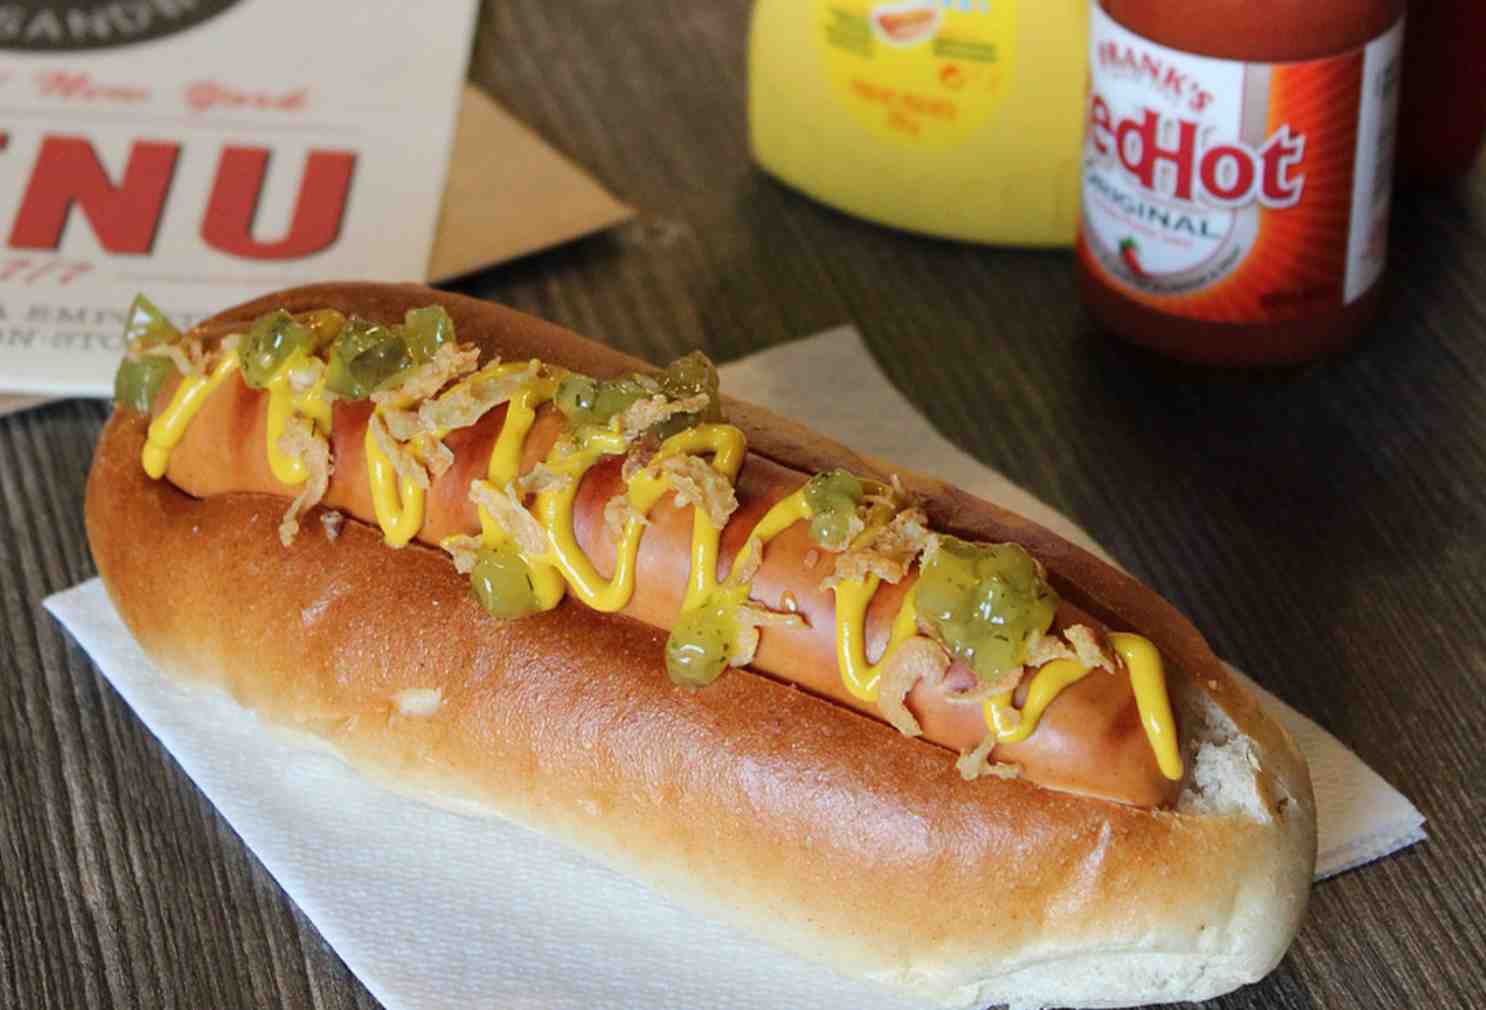 What is actually in hot dogs?